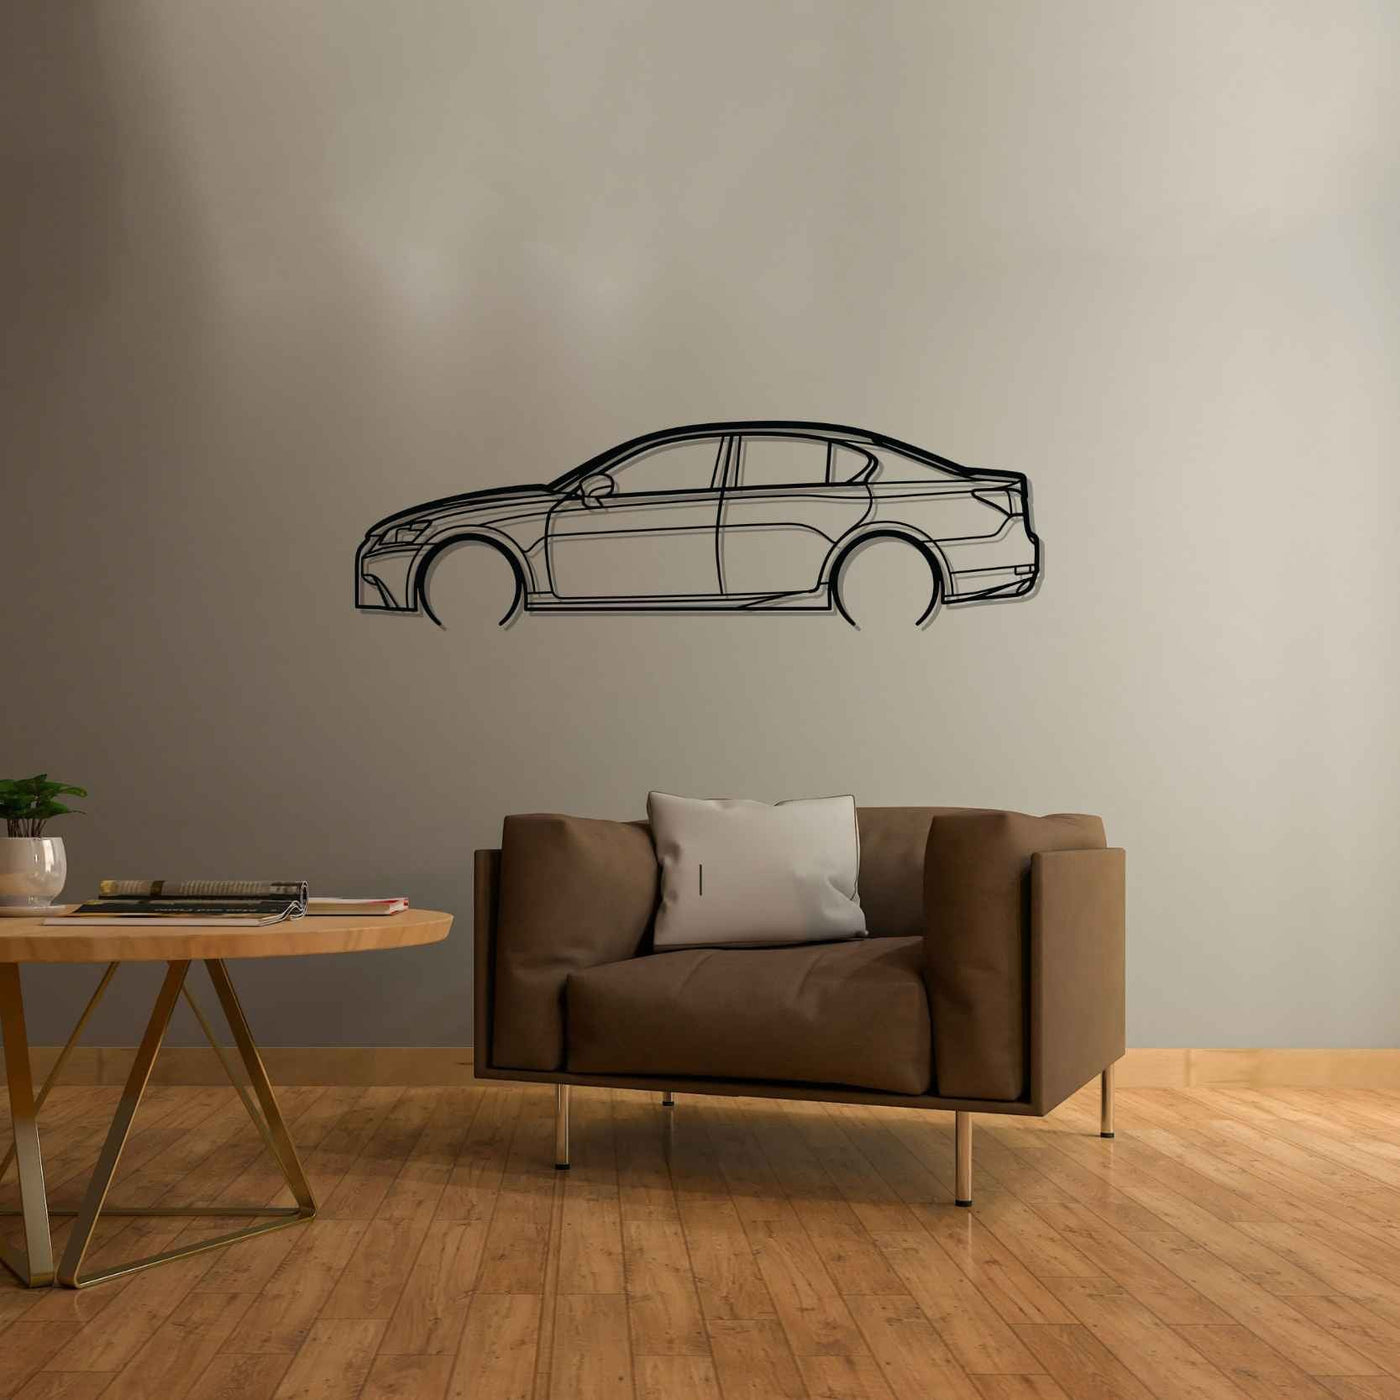 GS 350 2013 Detailed Silhouette Metal Wall Art